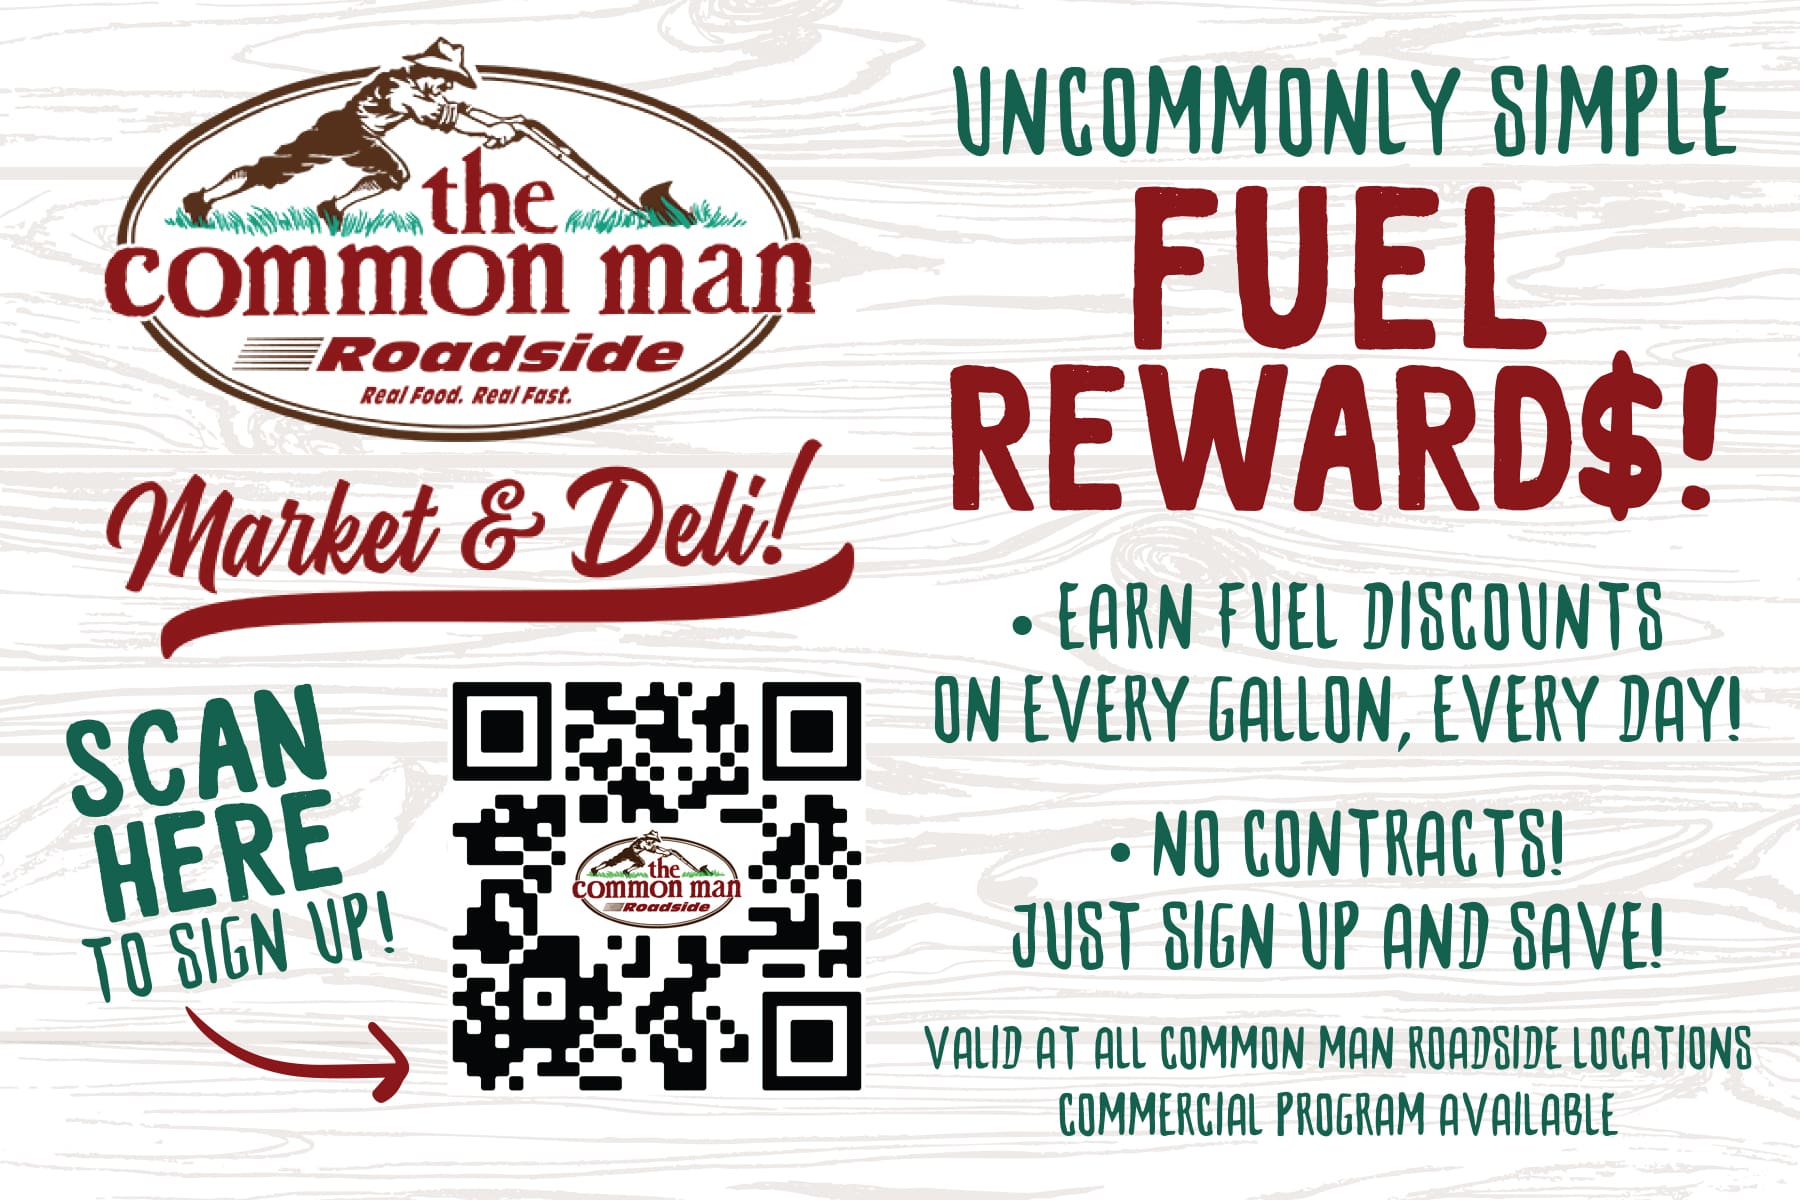 Information about Uncommonly Simple Fuel Rewards at the Commn Man Roadside